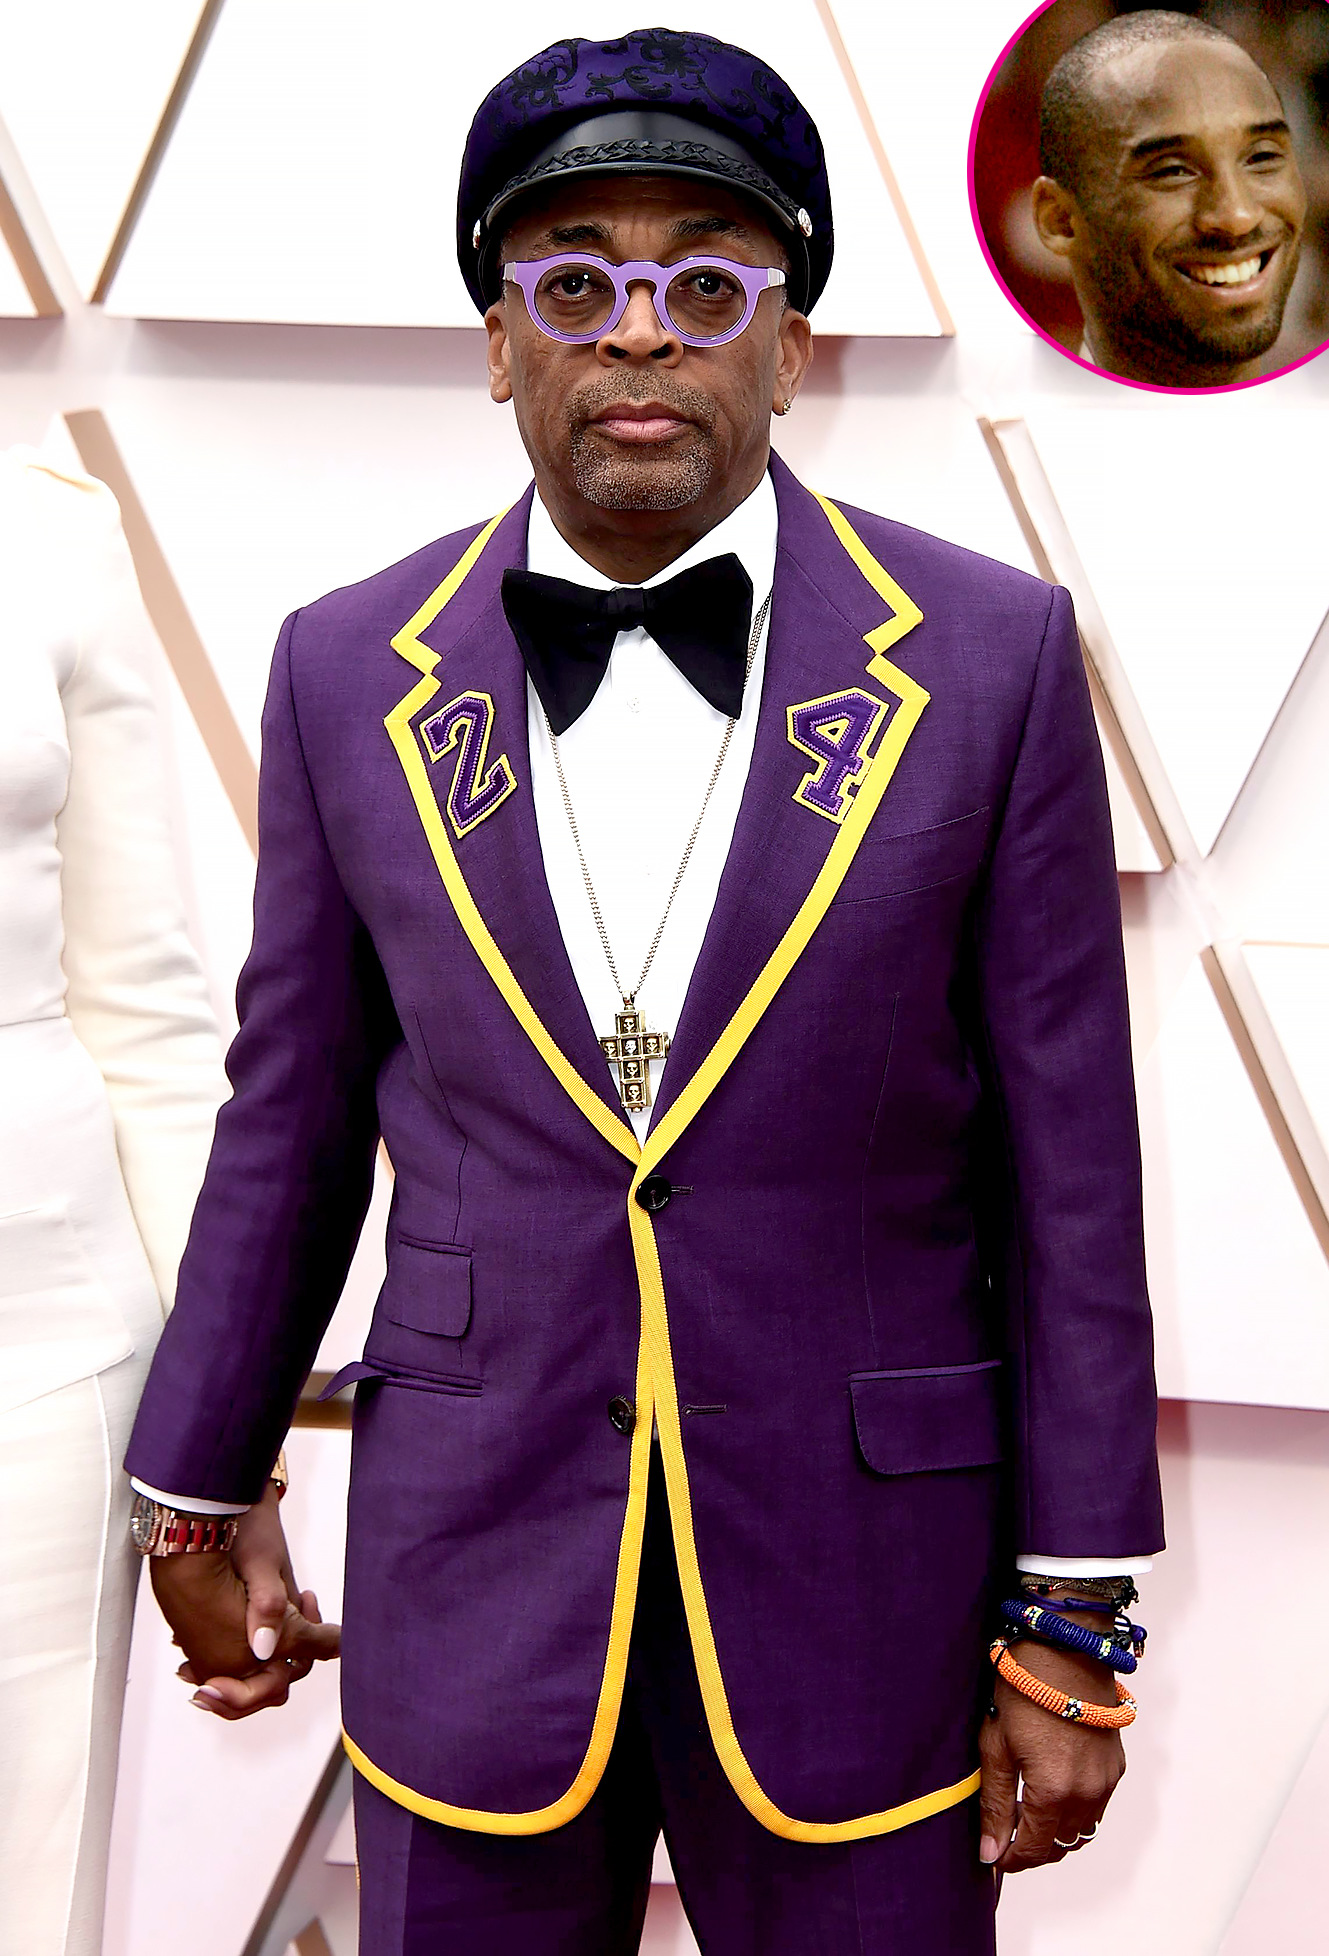 Spike Lee Honors Kobe Bryant With Lakers-Themed Outfit and Nike Kobe 9  Sneakers at 2020 Oscars